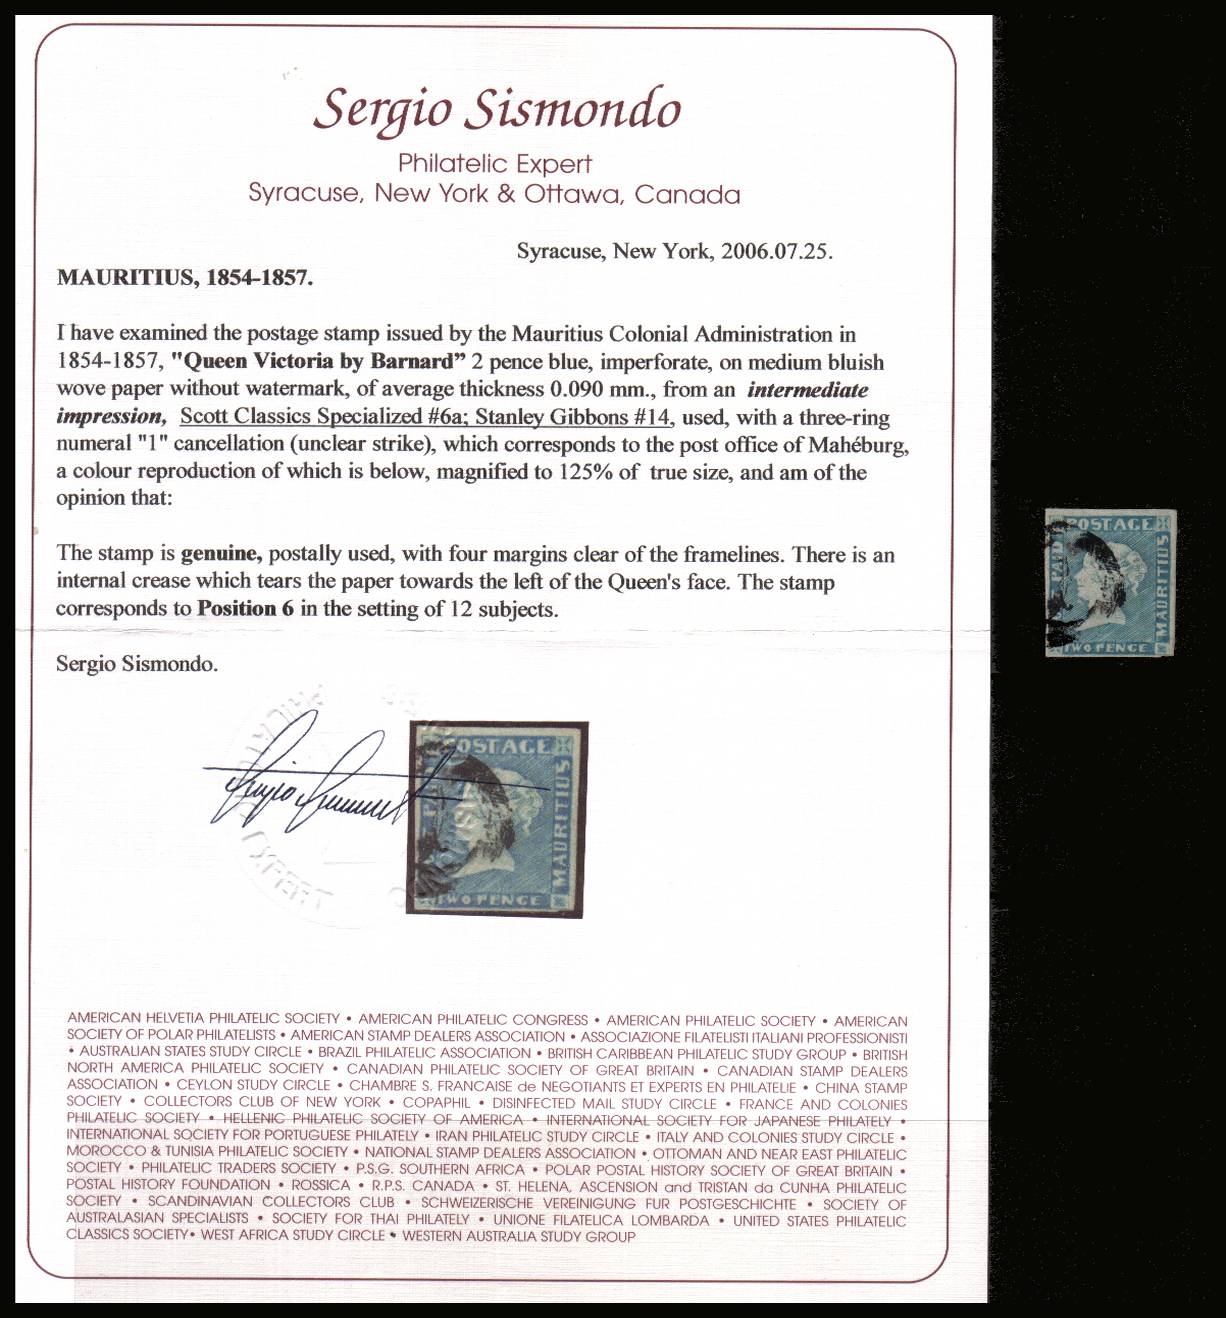 2d Blue, Imperforate on medium Bluish wove paper, intermediate impression<br/>
Cancelled with a three ring cancel with the bouus of a SISMONDO certificare stating GENUINE.<br/>A very rare ''classic' stamp. SG Cat 3500.00


<br/><b>QHX</b>